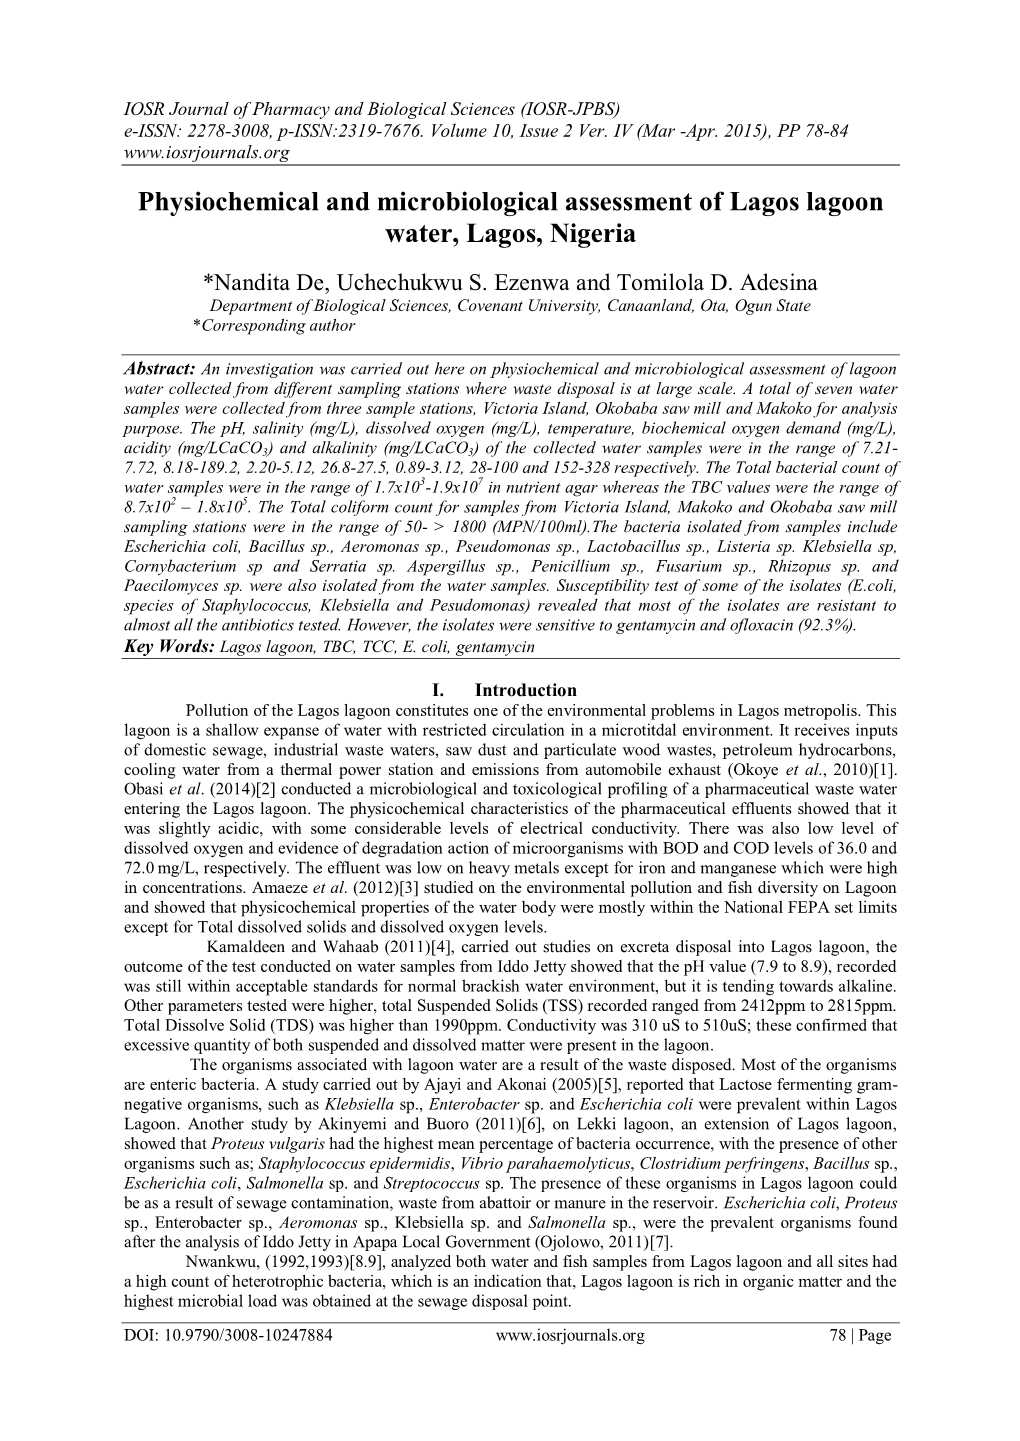 Physiochemical and Microbiological Assessment of Lagos Lagoon Water, Lagos, Nigeria